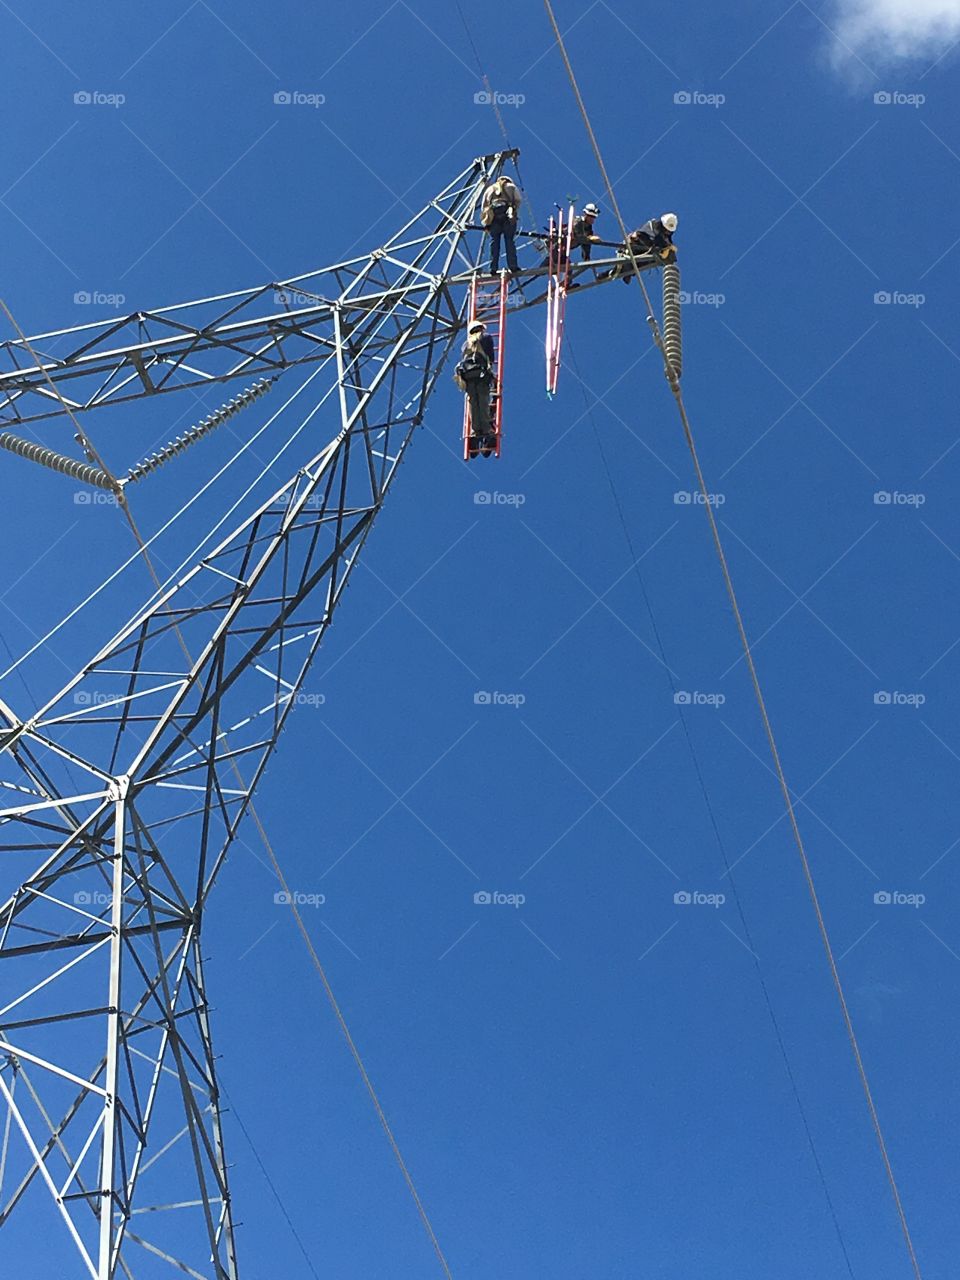 Lineman working from ladder on energized lines. 